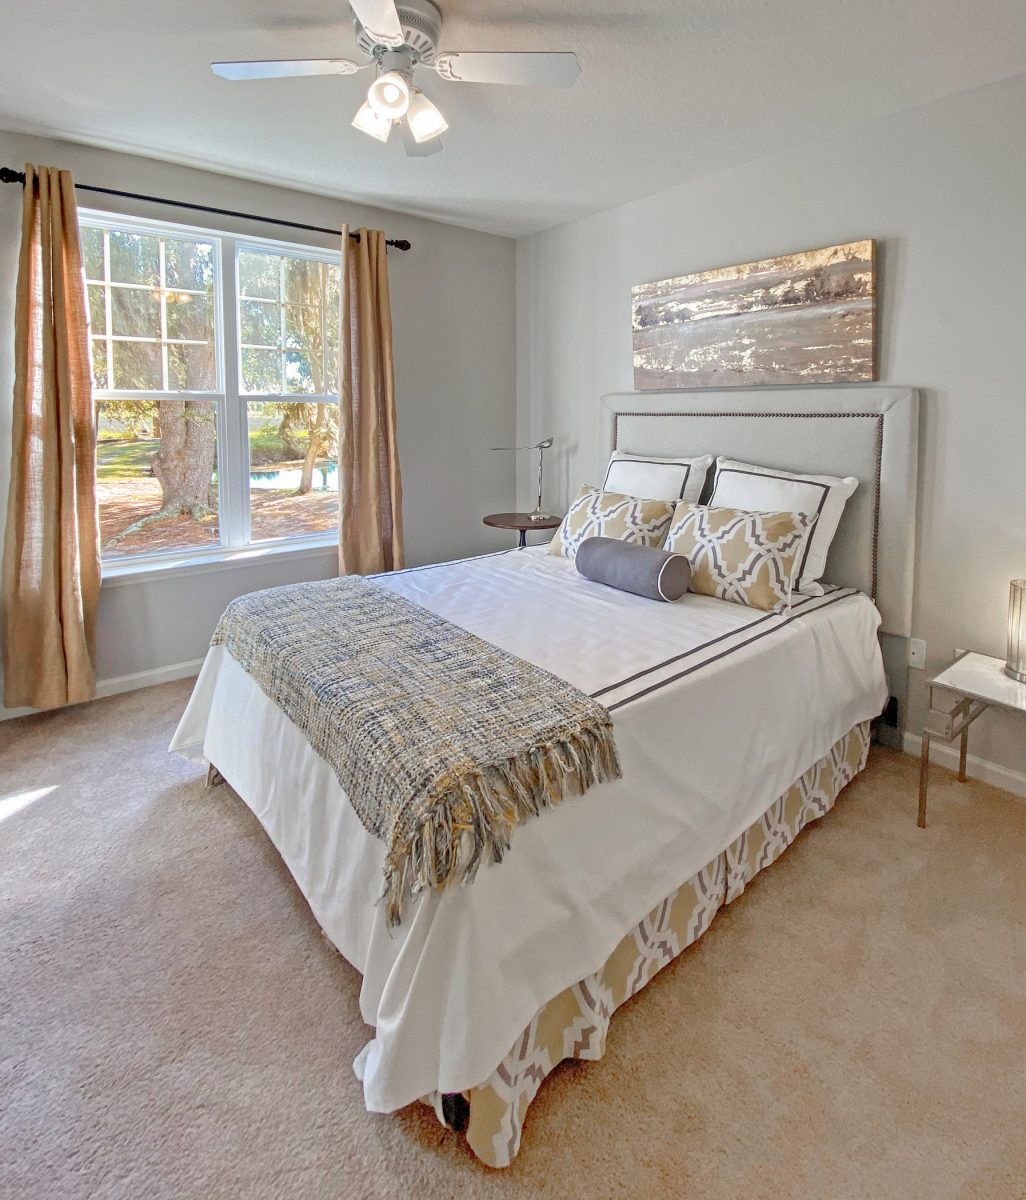 Carpeted bedroom with a queen bed, two night stands, and a large open window with a view of the beautiful marsh.